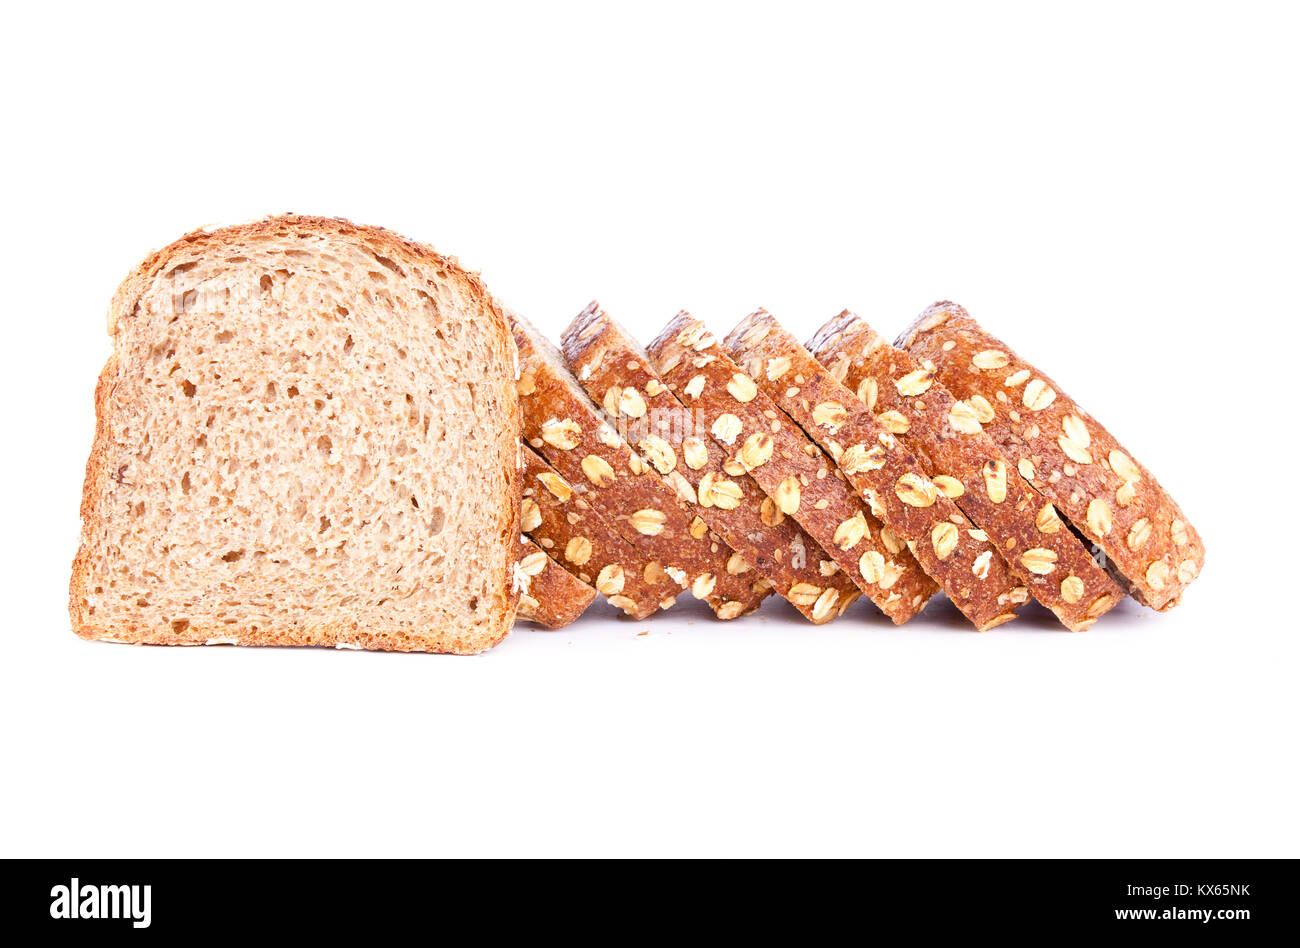 Healthy bran bread slices with oats isolated on white background Stock Photo